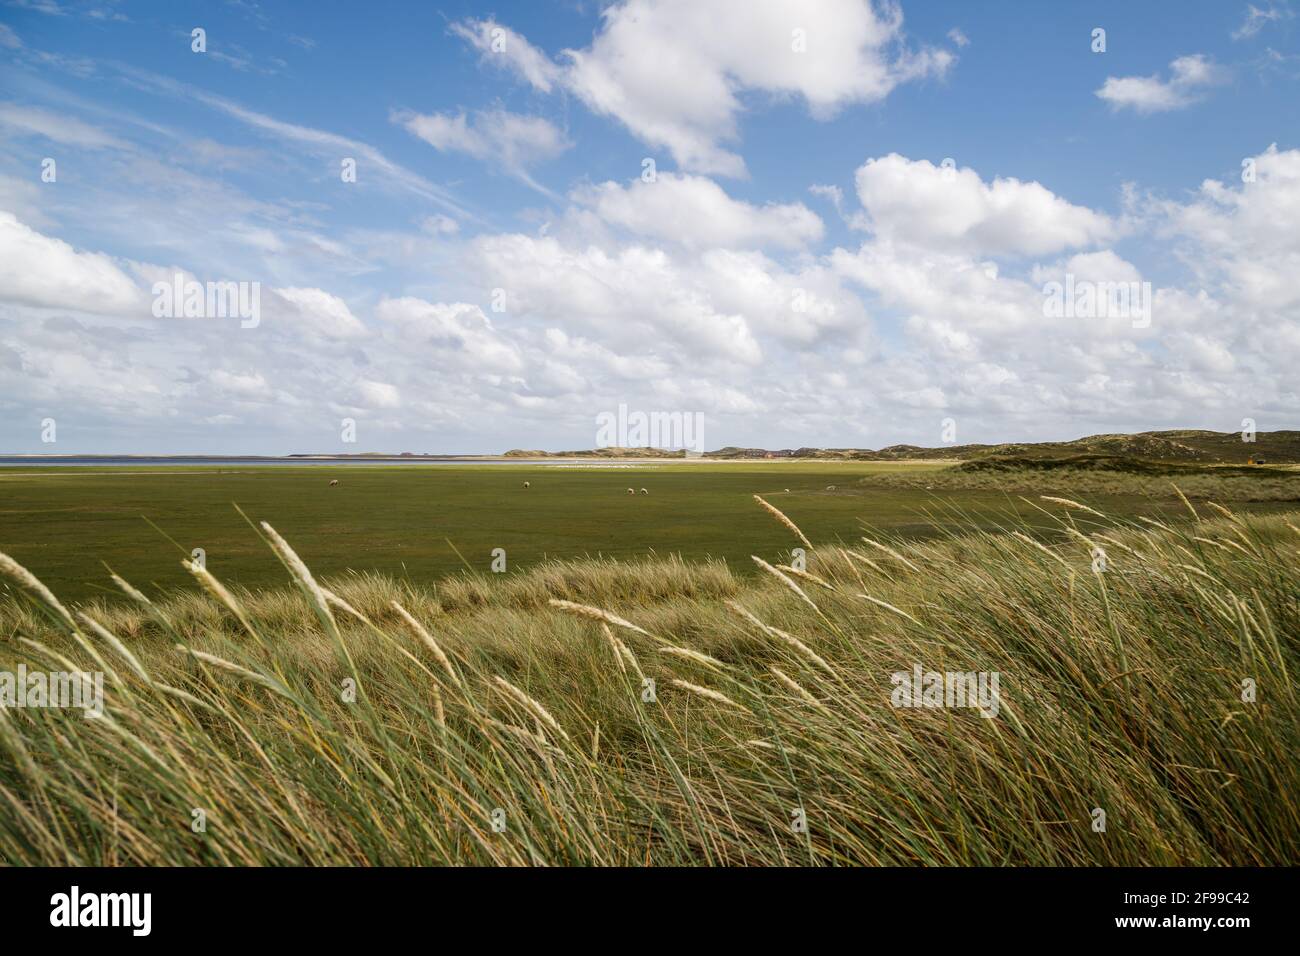 Sheep in the dune landscape on the Wadden Sea, northern landscape on the island of Sylt, Germany, Europe Stock Photo